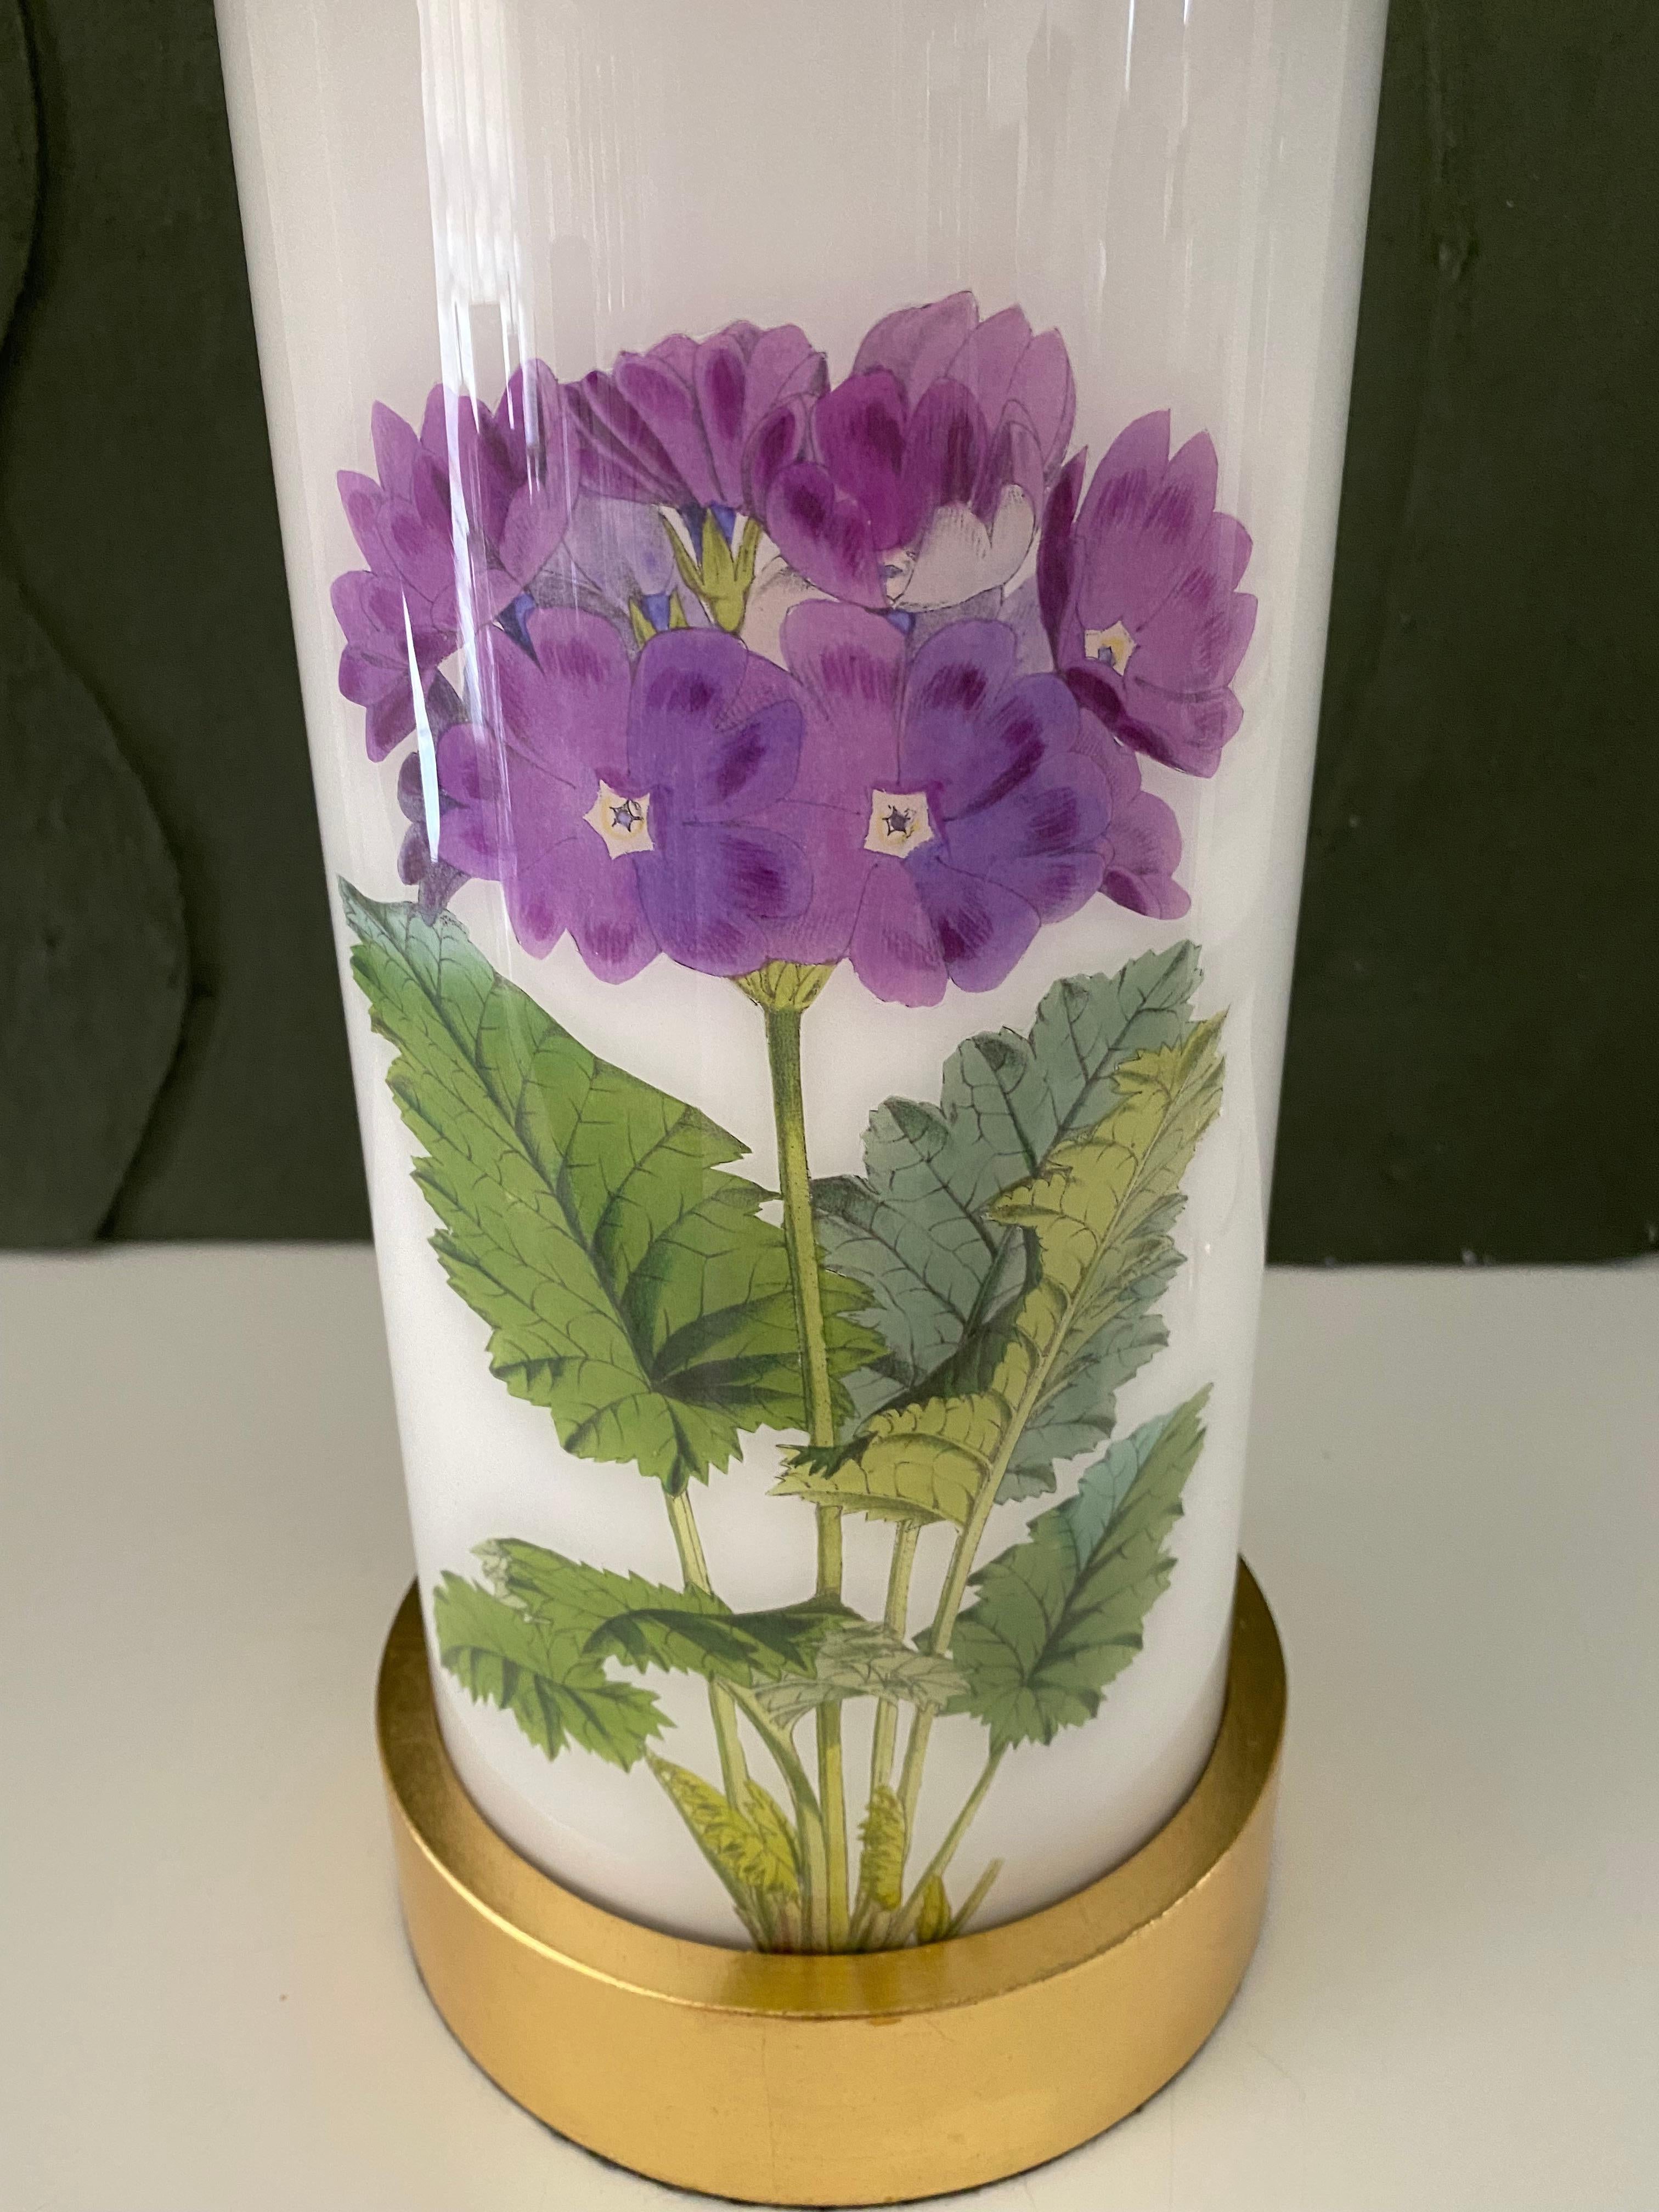 Hand made with care in Houston, Texas. This beautiful decoupage lamp was created using 19th century hand-colored botanical engraving and features a single insect on the bag for a bit of charm and whimsy. Polished brass dimmer socket and clear cord.